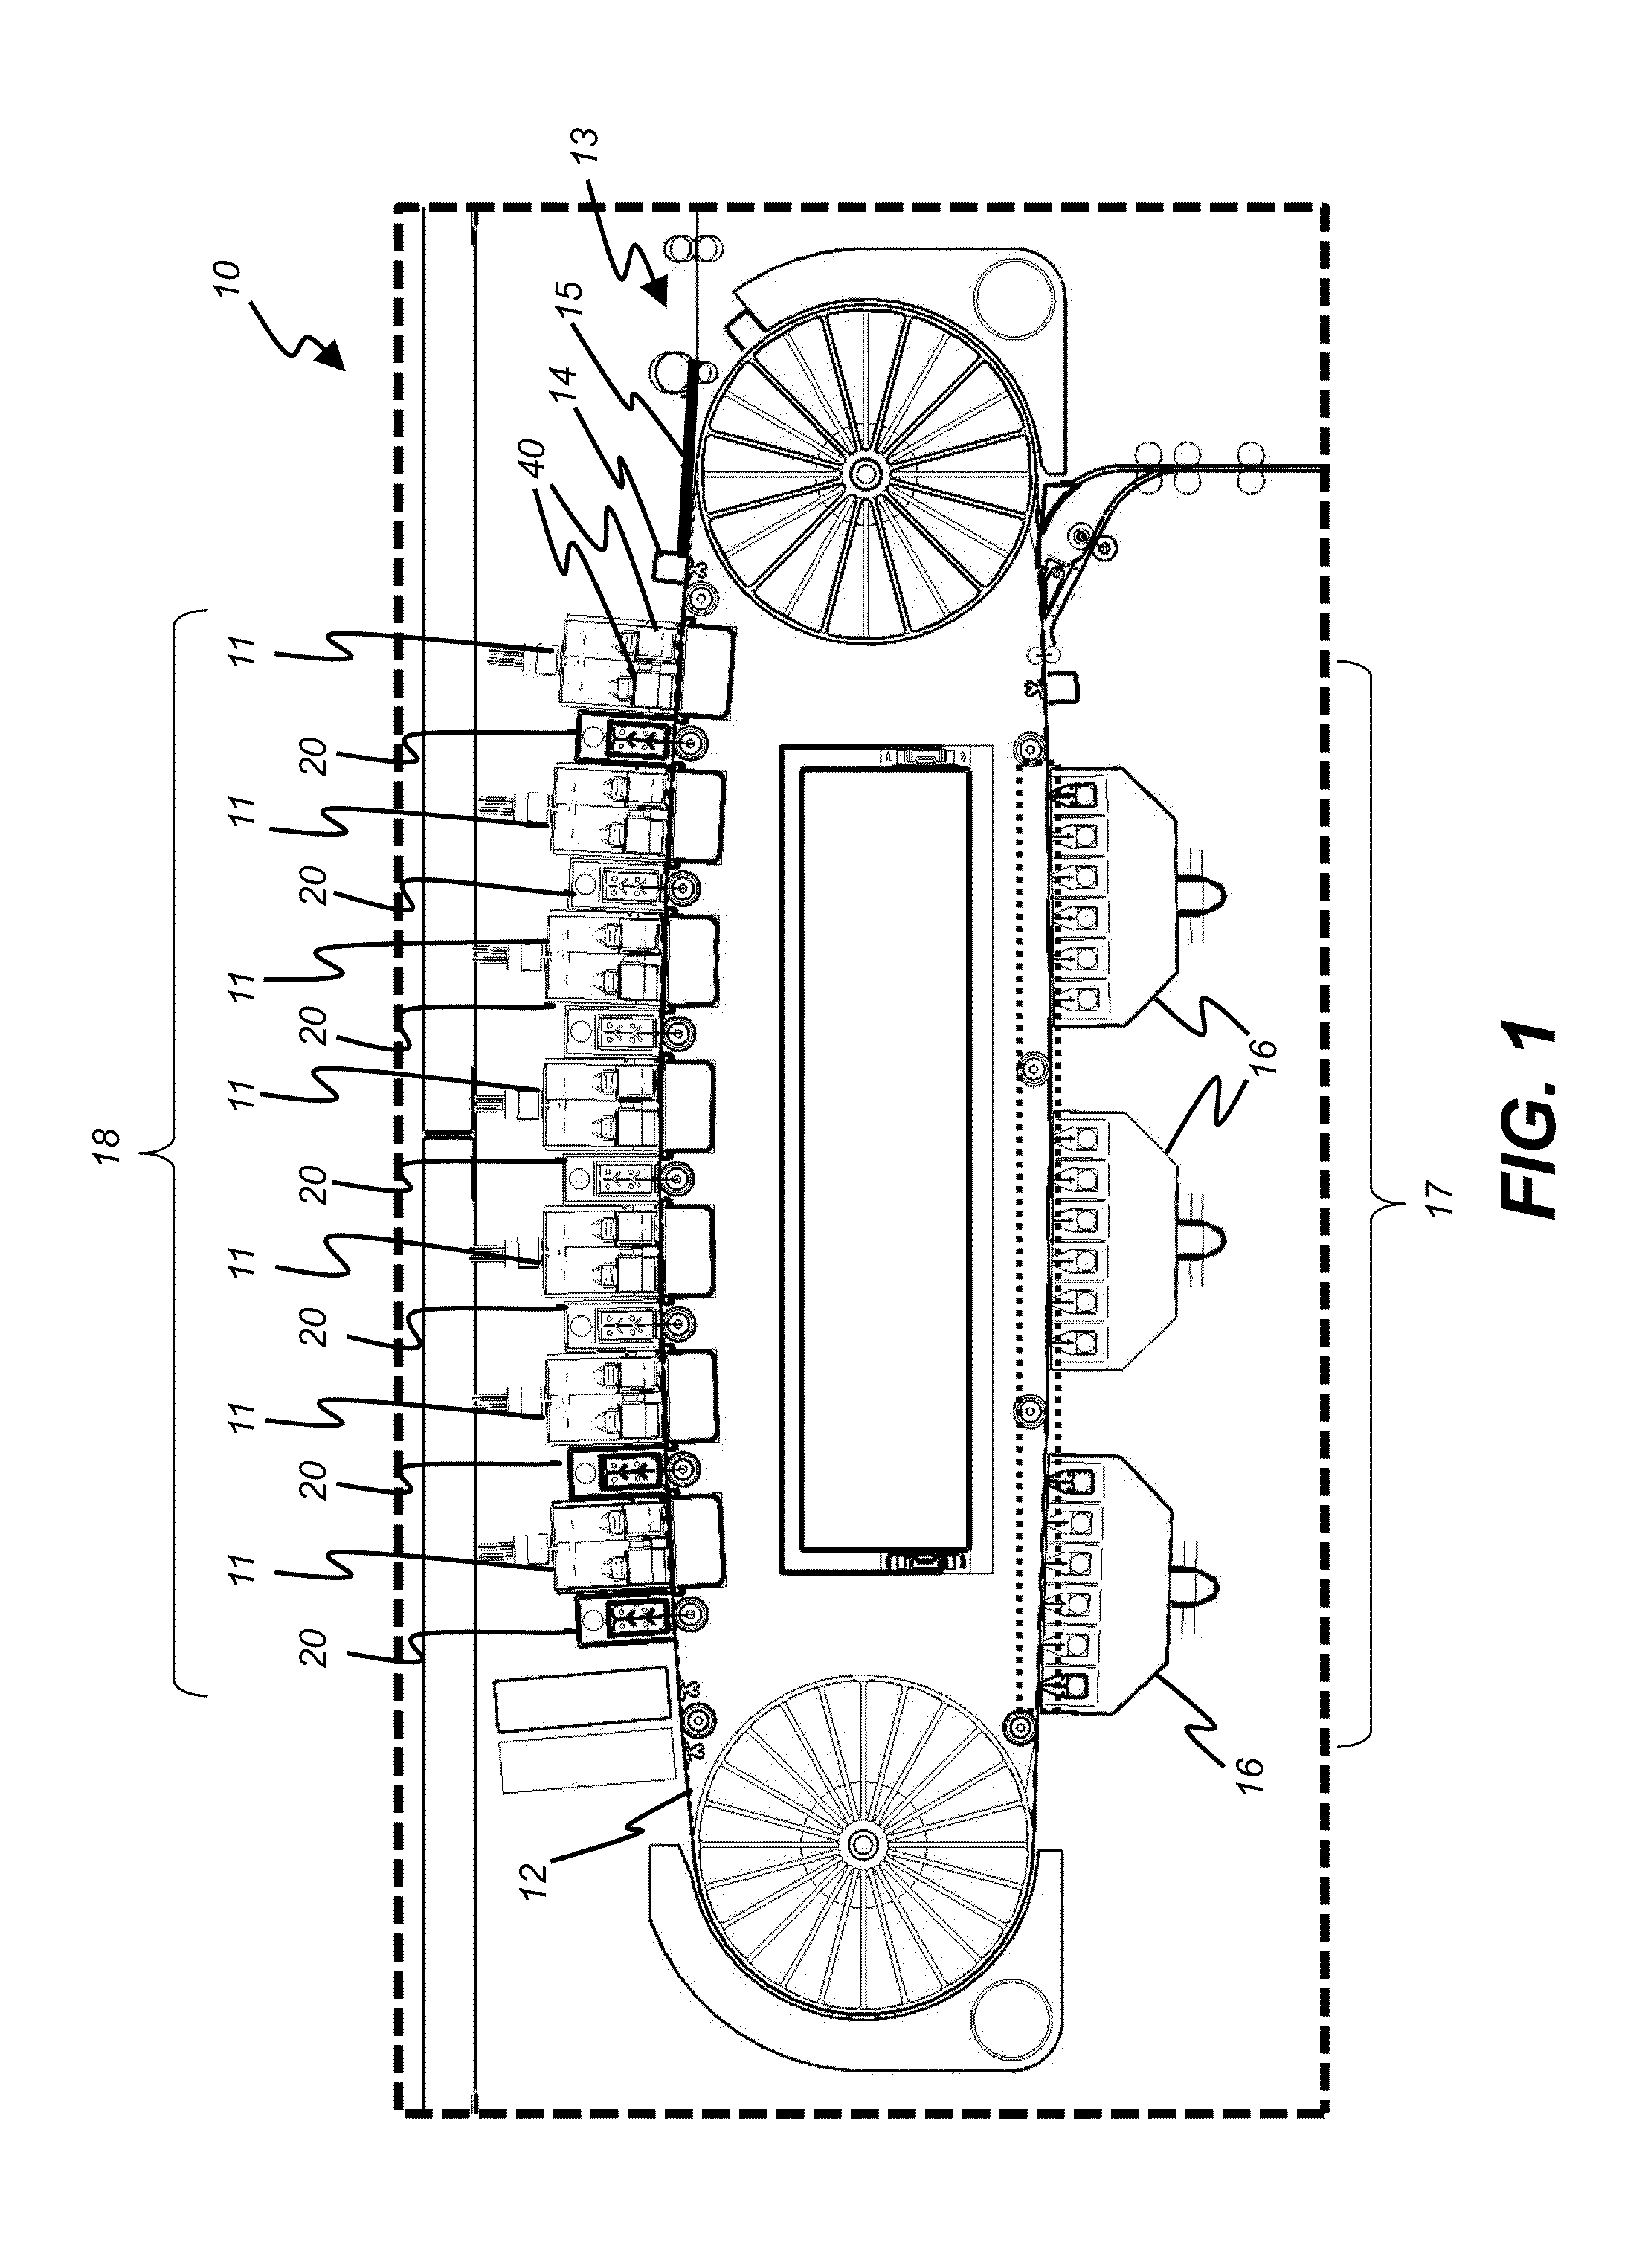 Acoustic drying system with interspersed exhaust channels